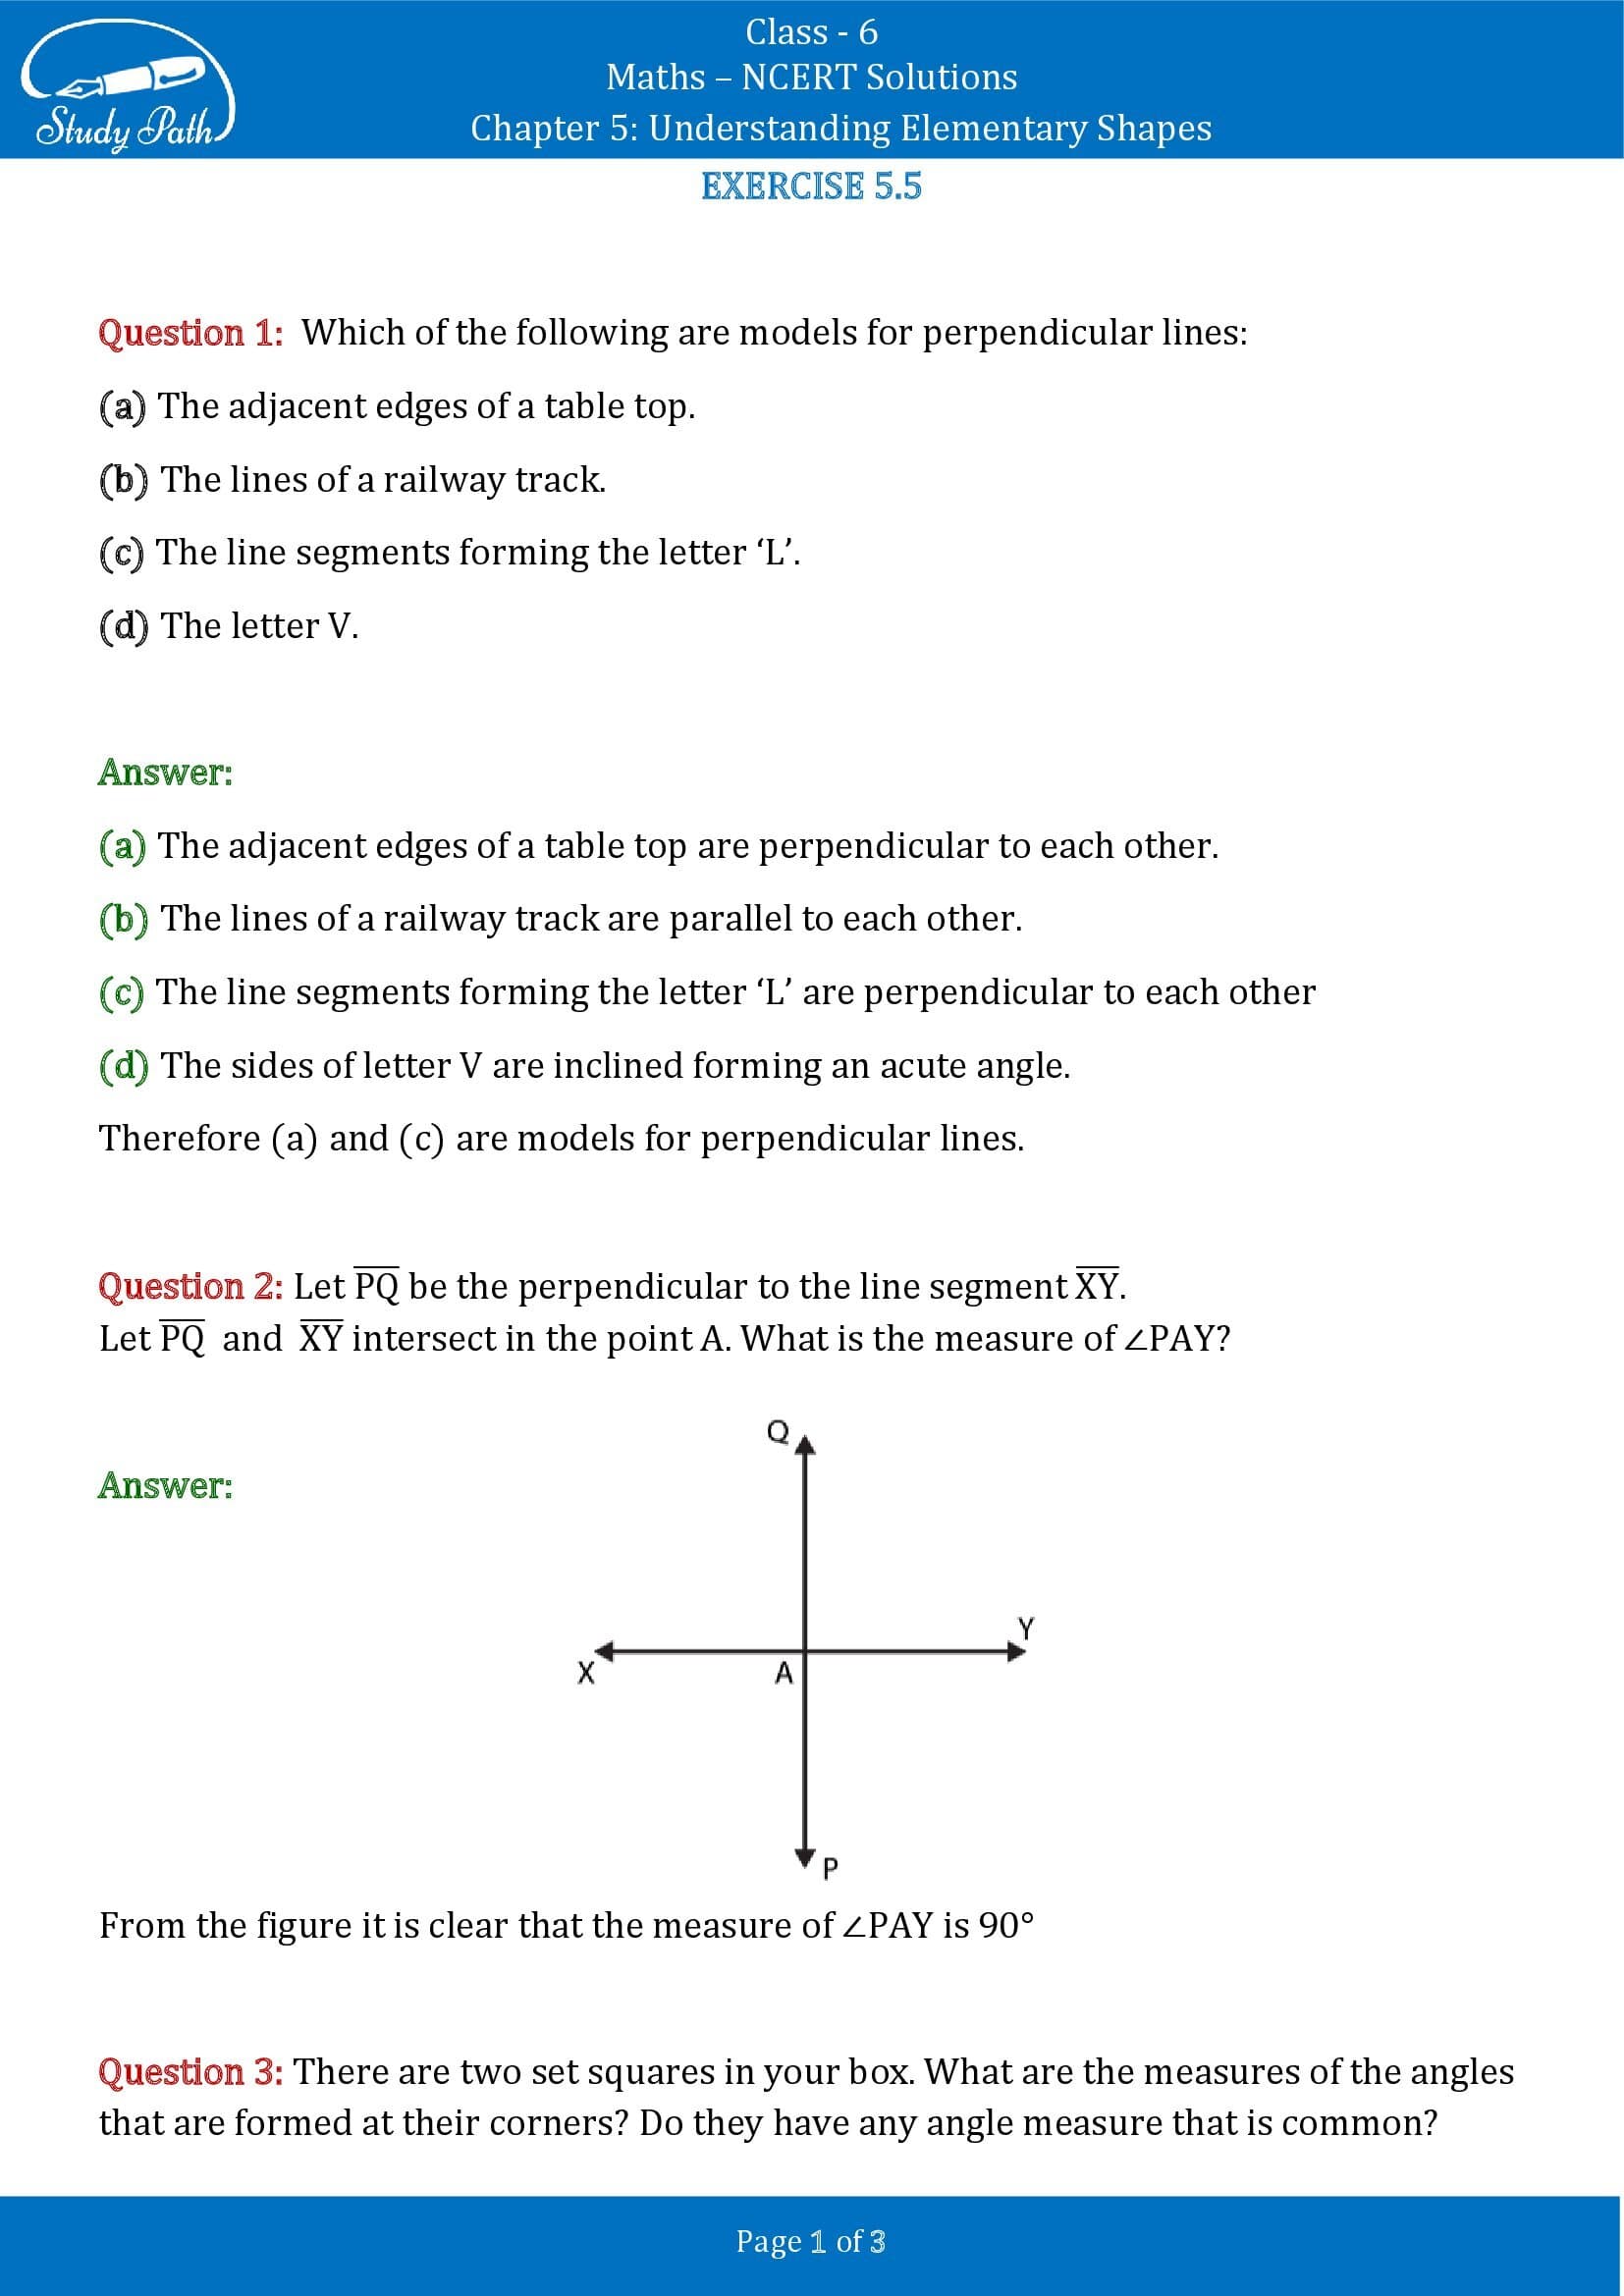 NCERT Solutions for Class 6 Maths Chapter 5 Understanding Elementary Shapes Exercise 5.5 00001